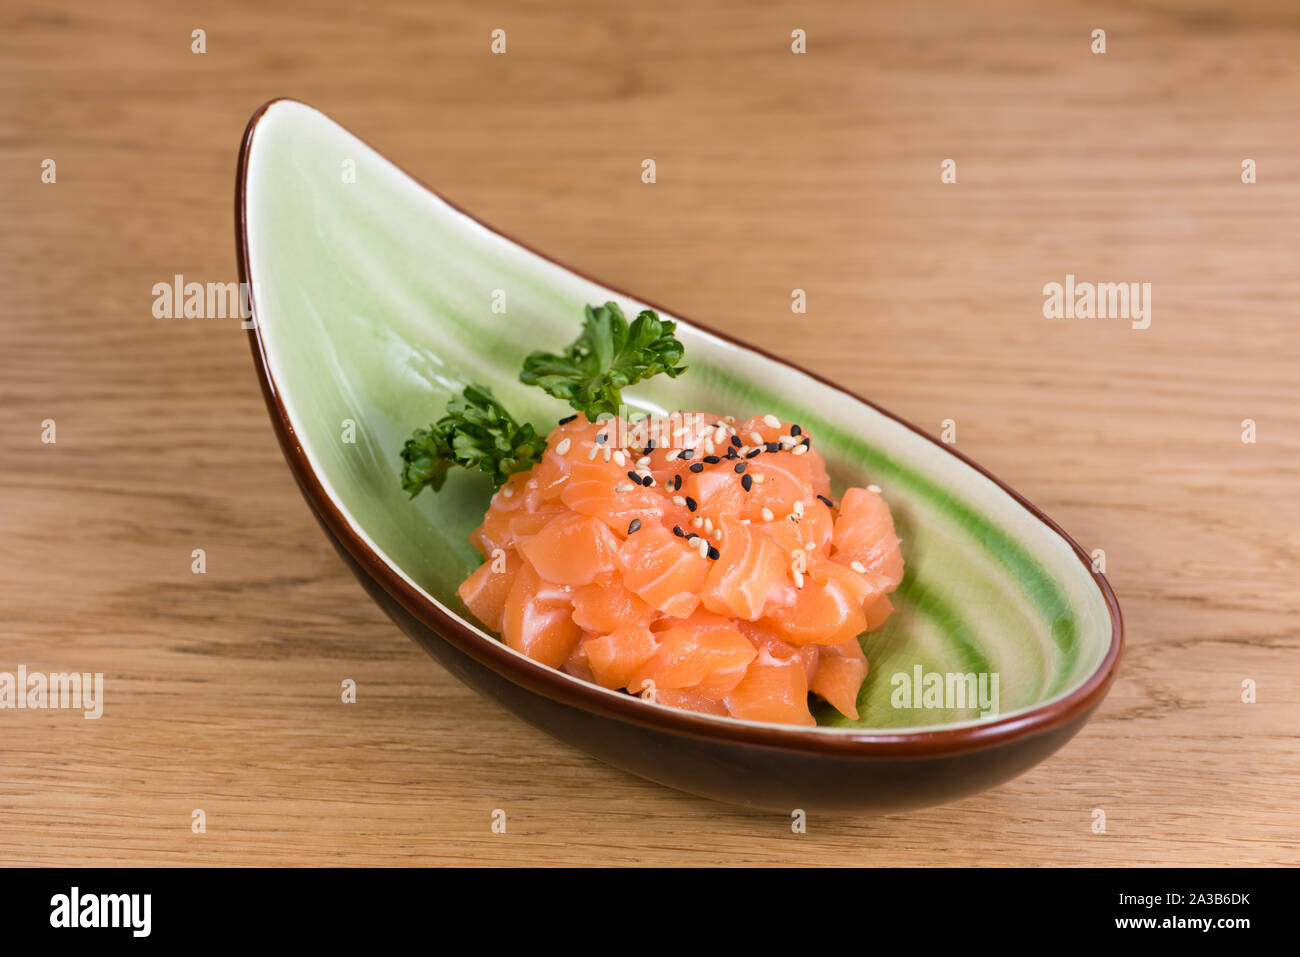 fresh salmon tartare with black and white sesame, served on a boat-shaped plate Stock Photo